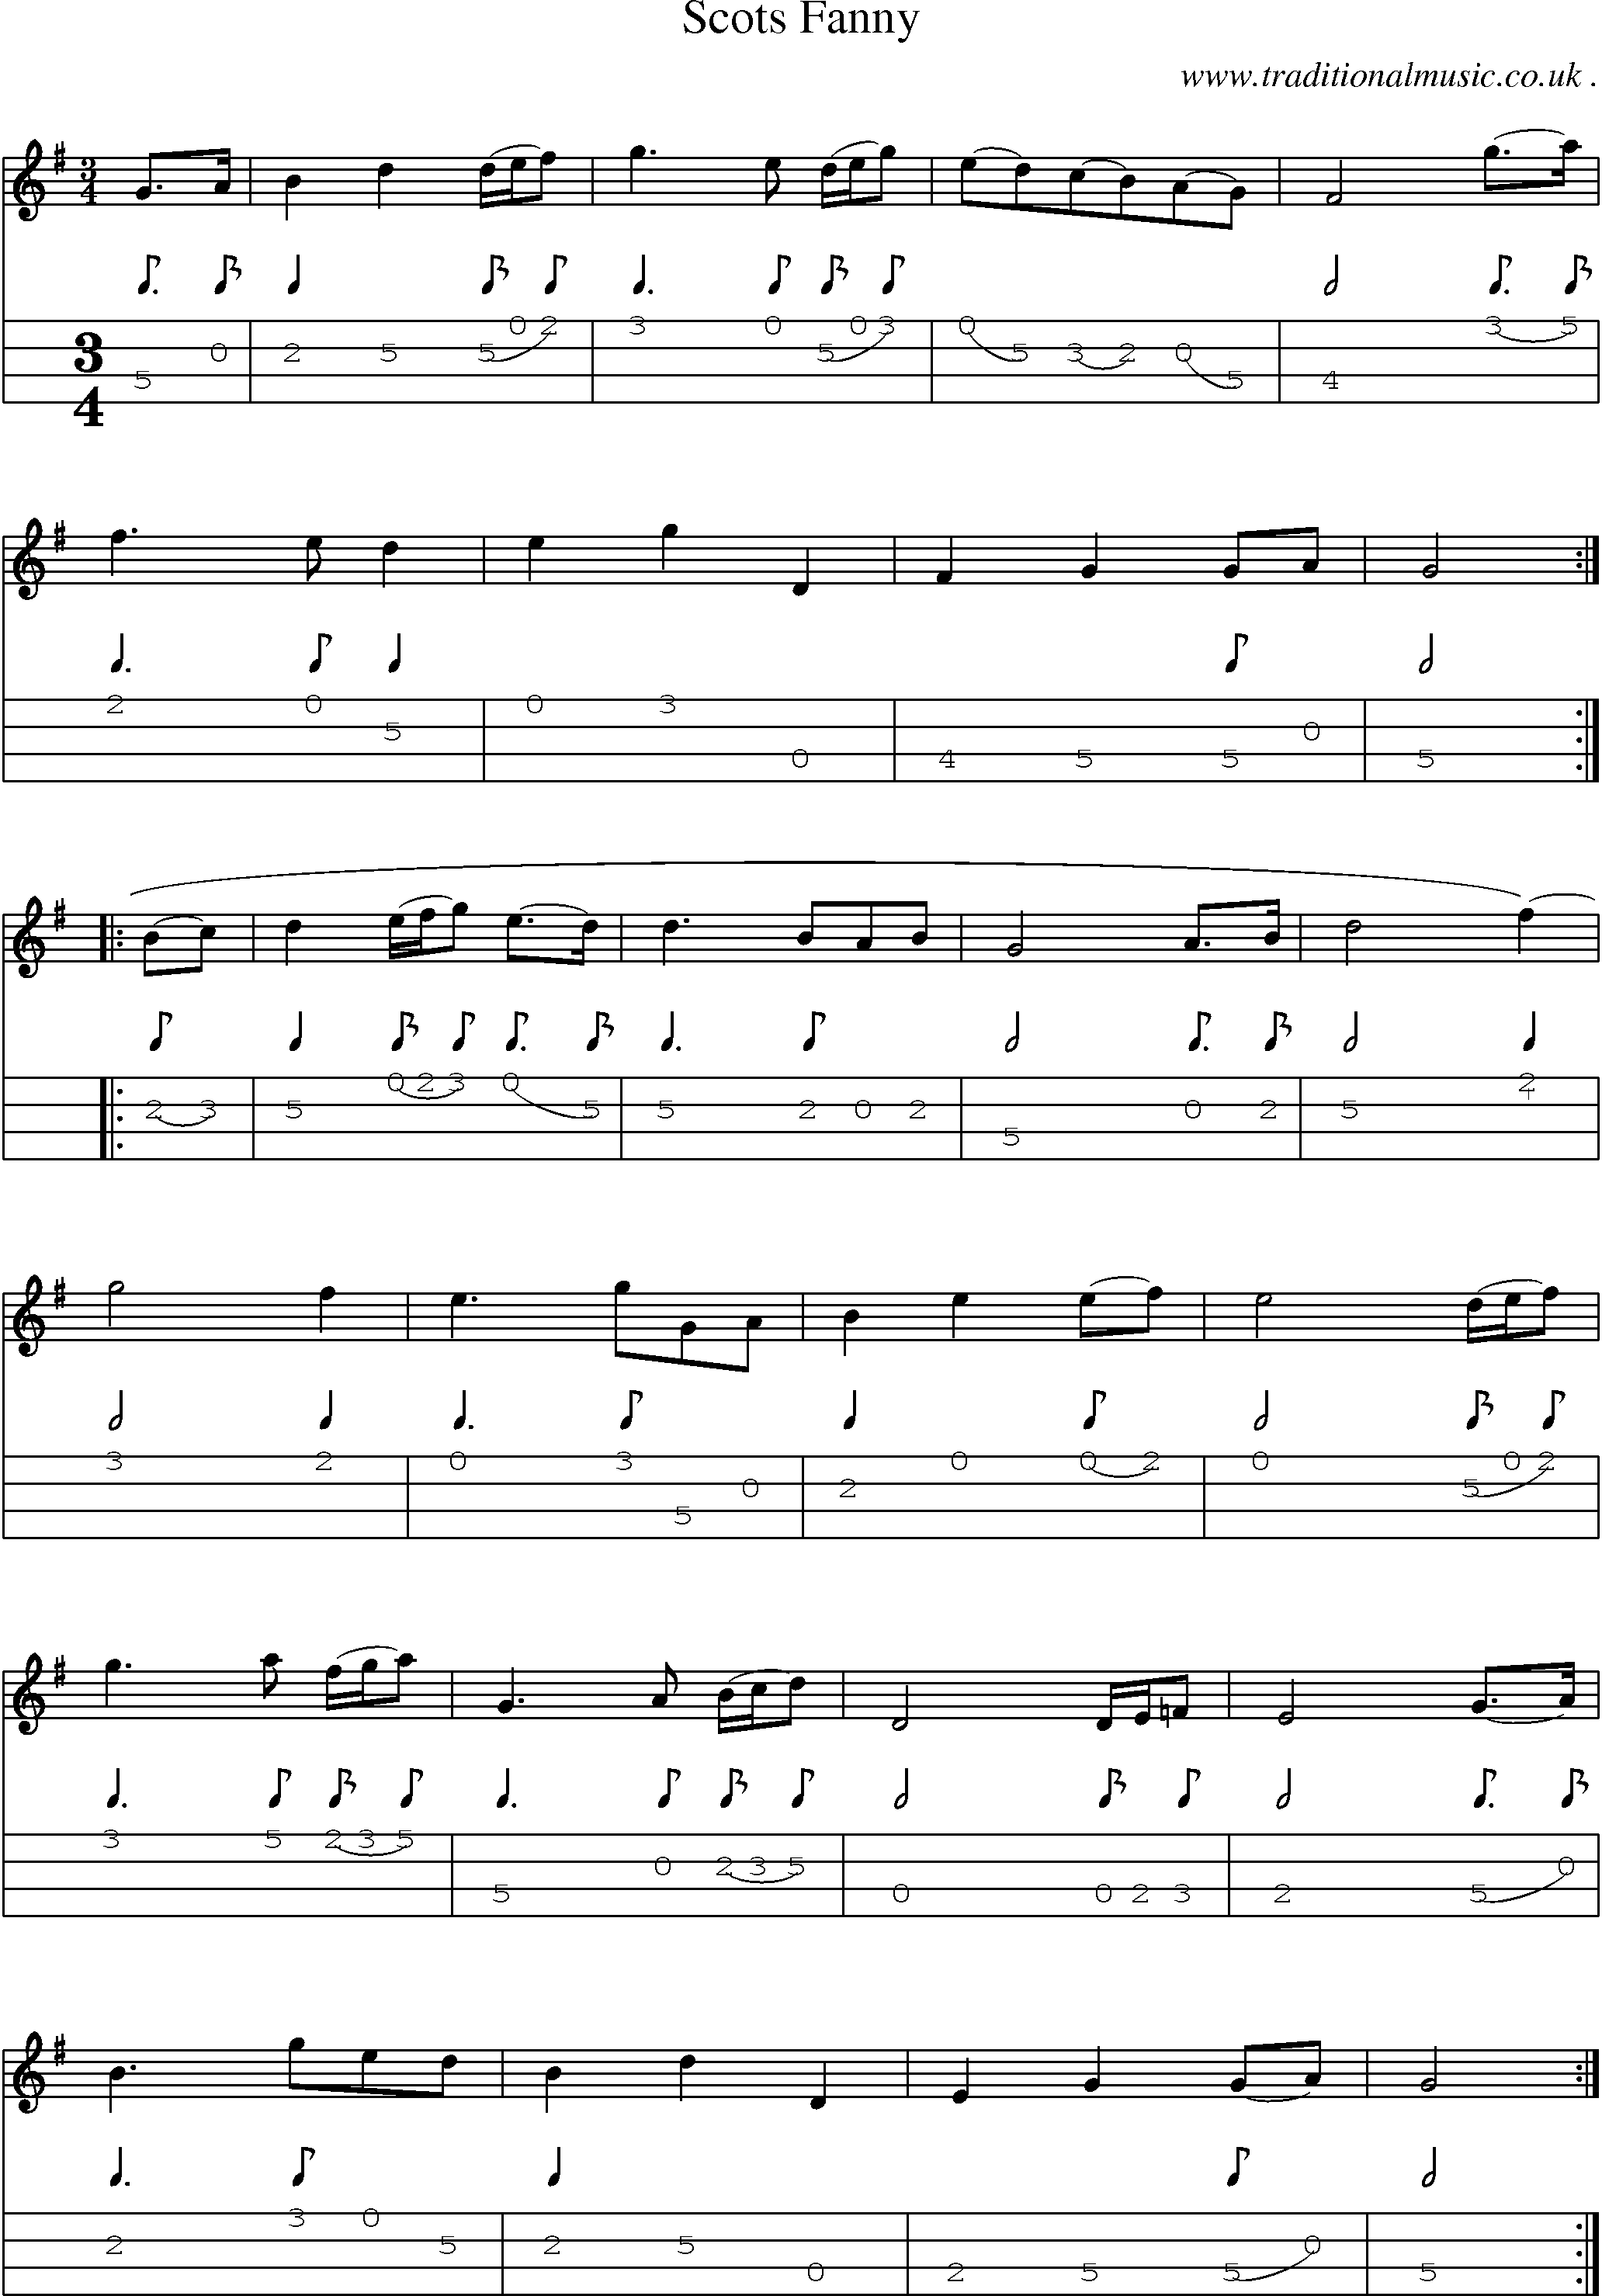 Sheet-Music and Mandolin Tabs for Scots Fanny